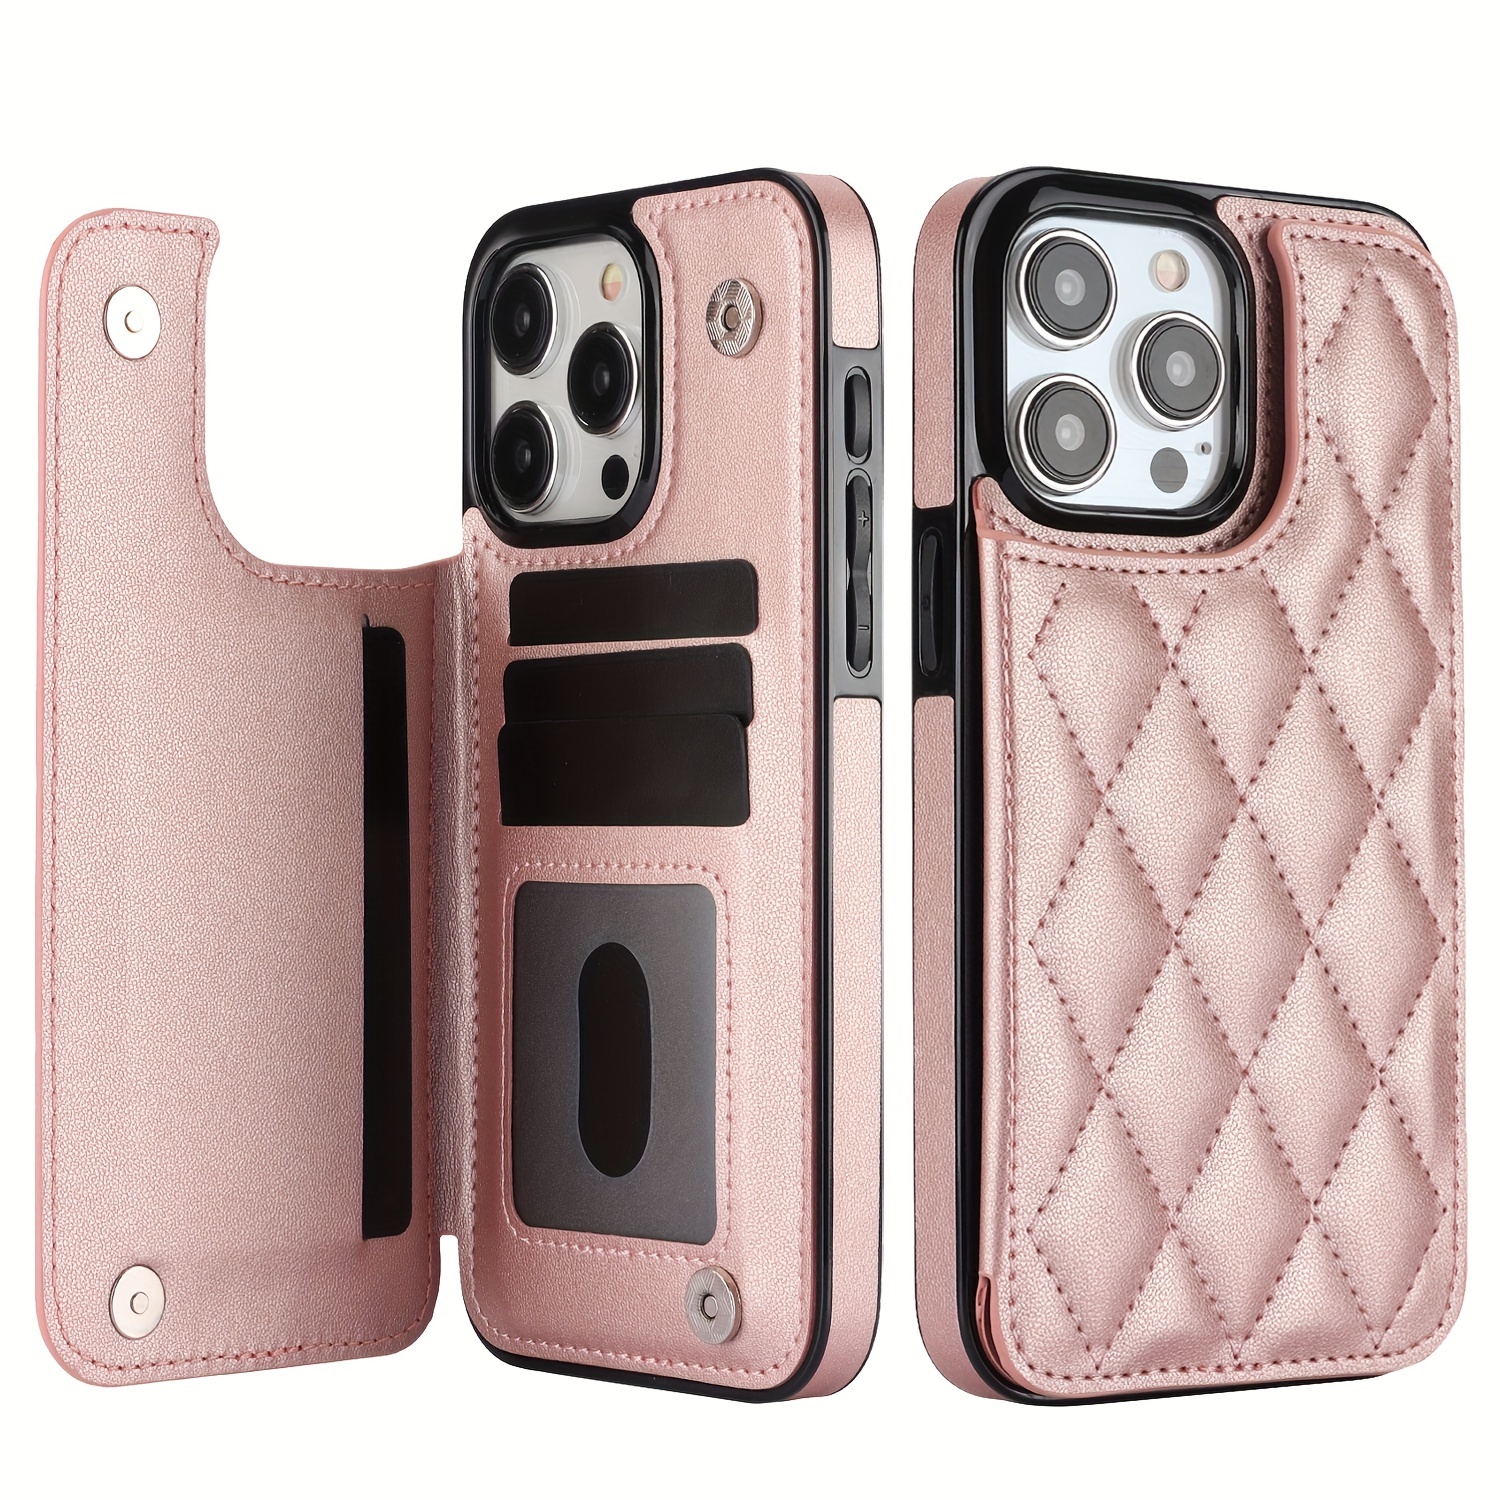 Goodsprout Compatible with iPhone Xs Max Case,Gathering Energy iPhone Xs  Max Cases for Girls,Anime Pattern Design Shockproof Non-Slip Case for  iPhone